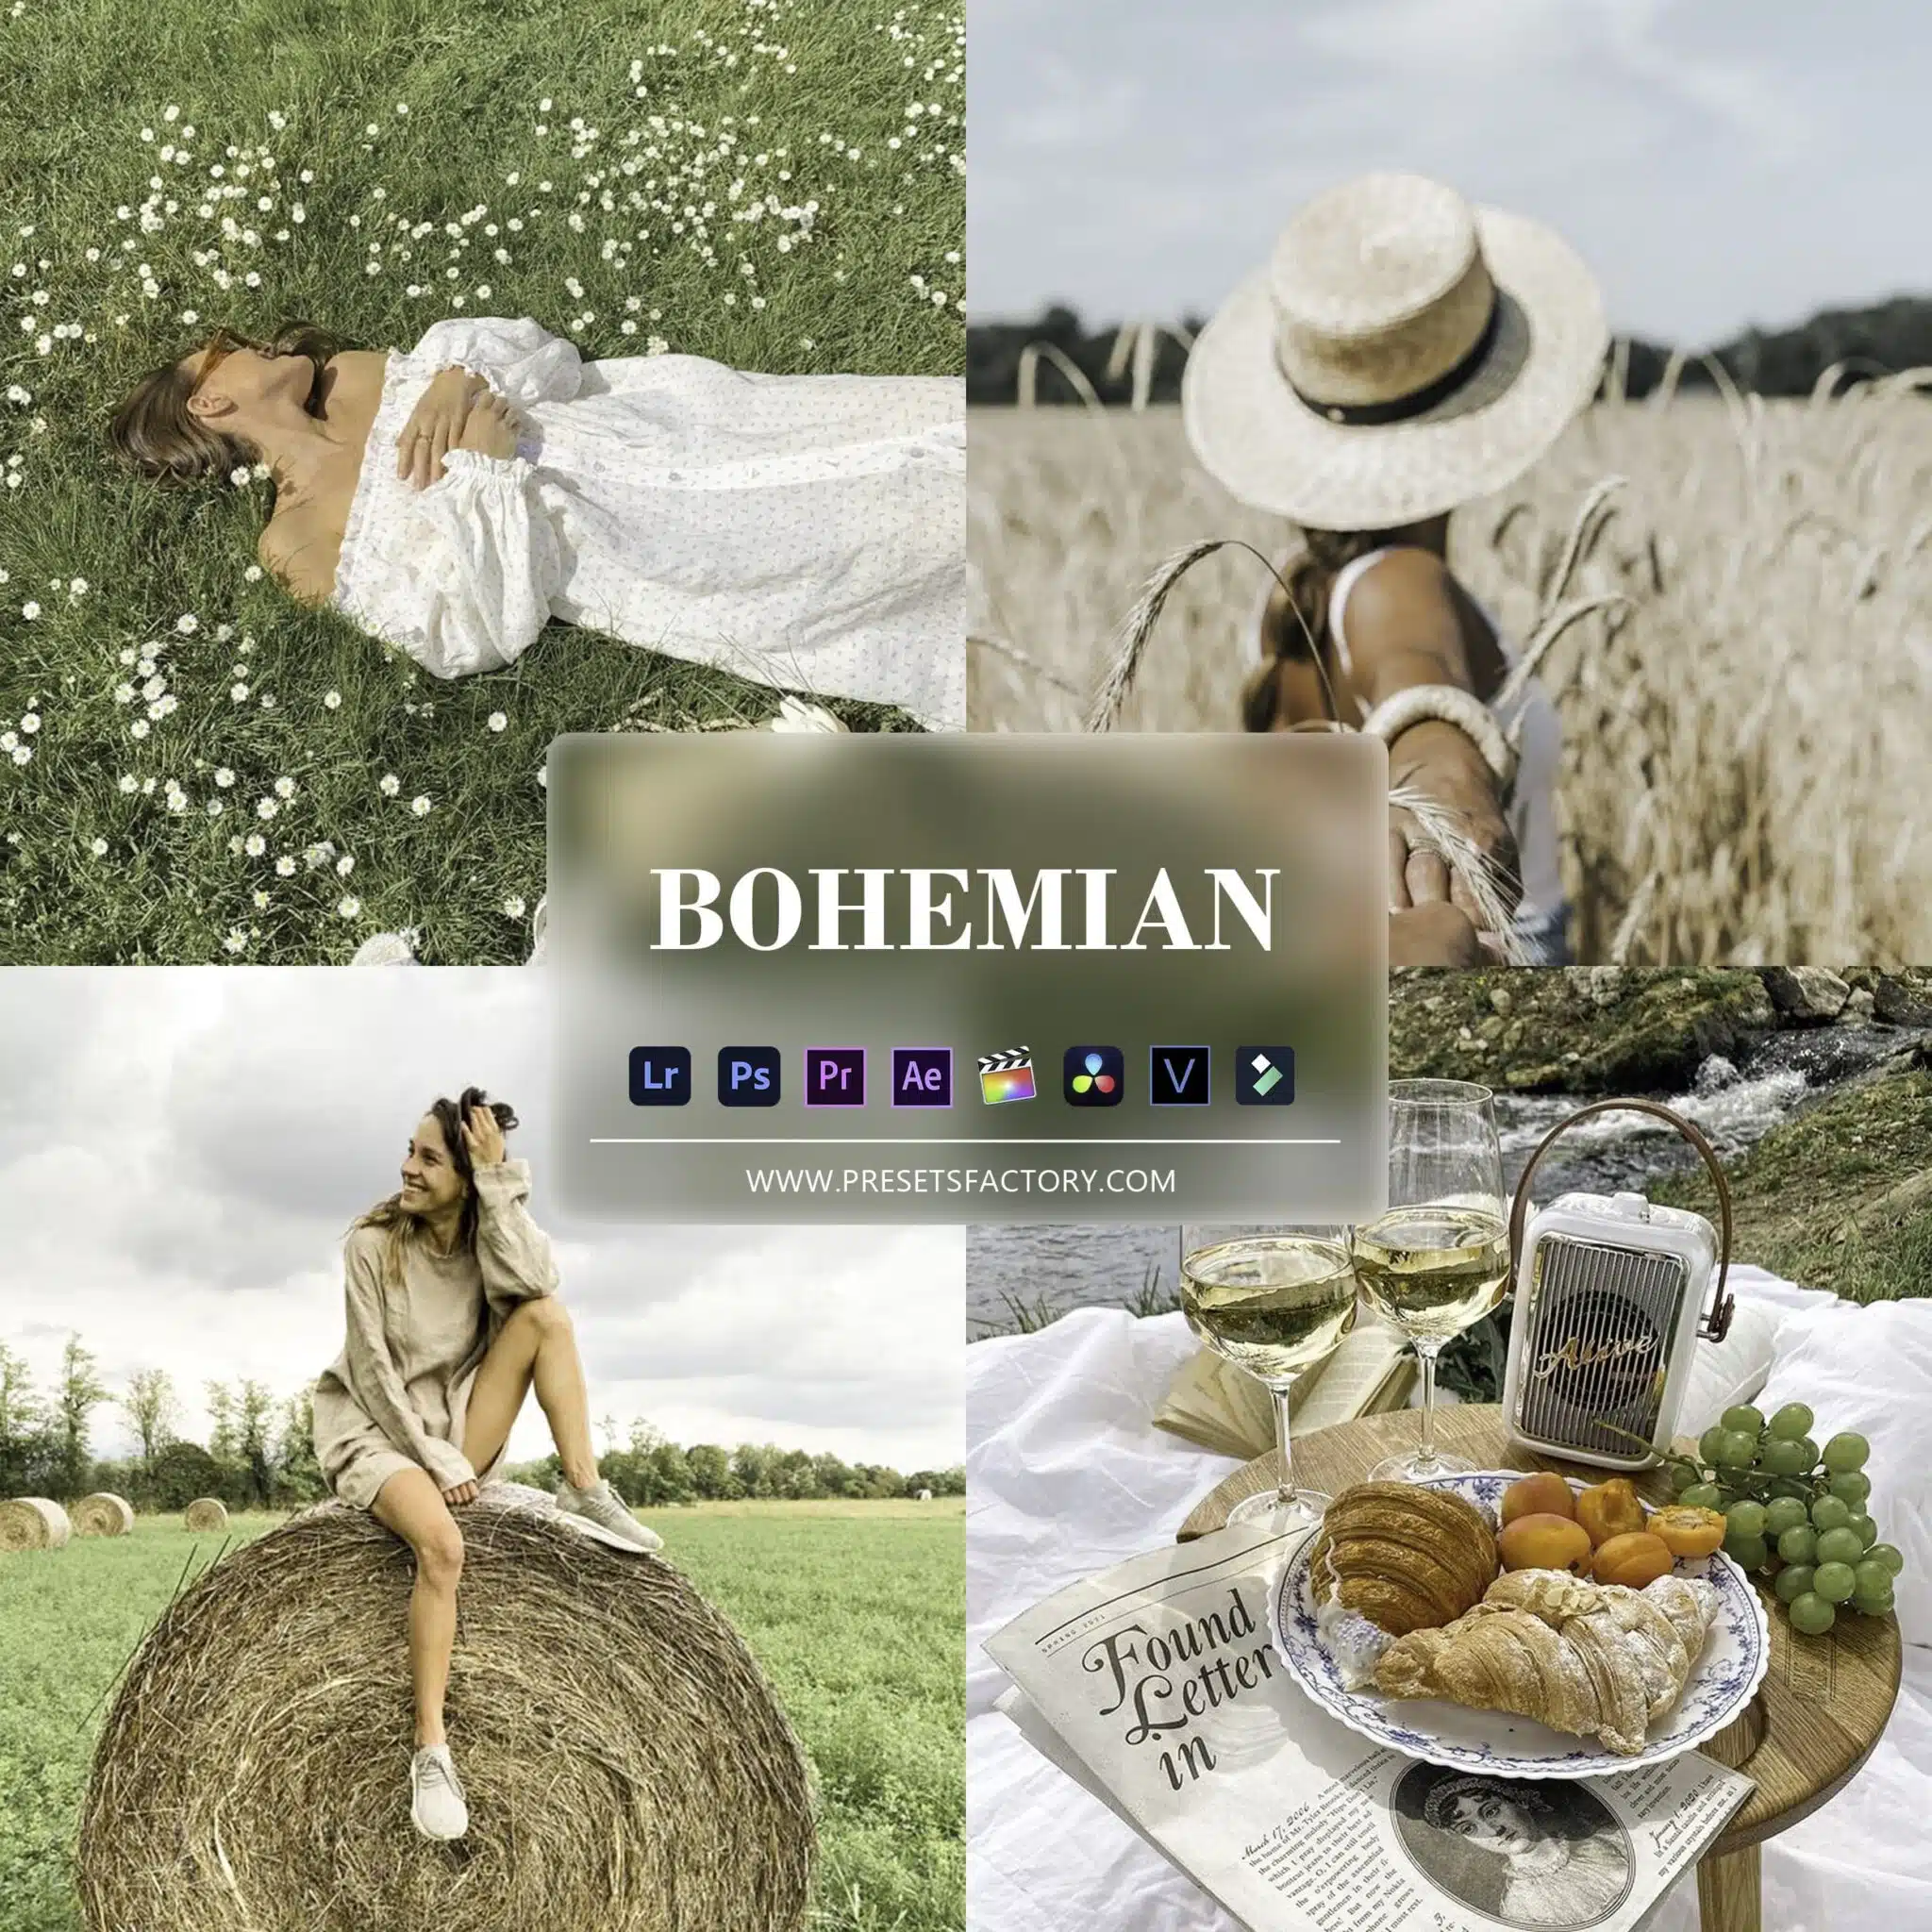 amazing Bohemian Presets collection